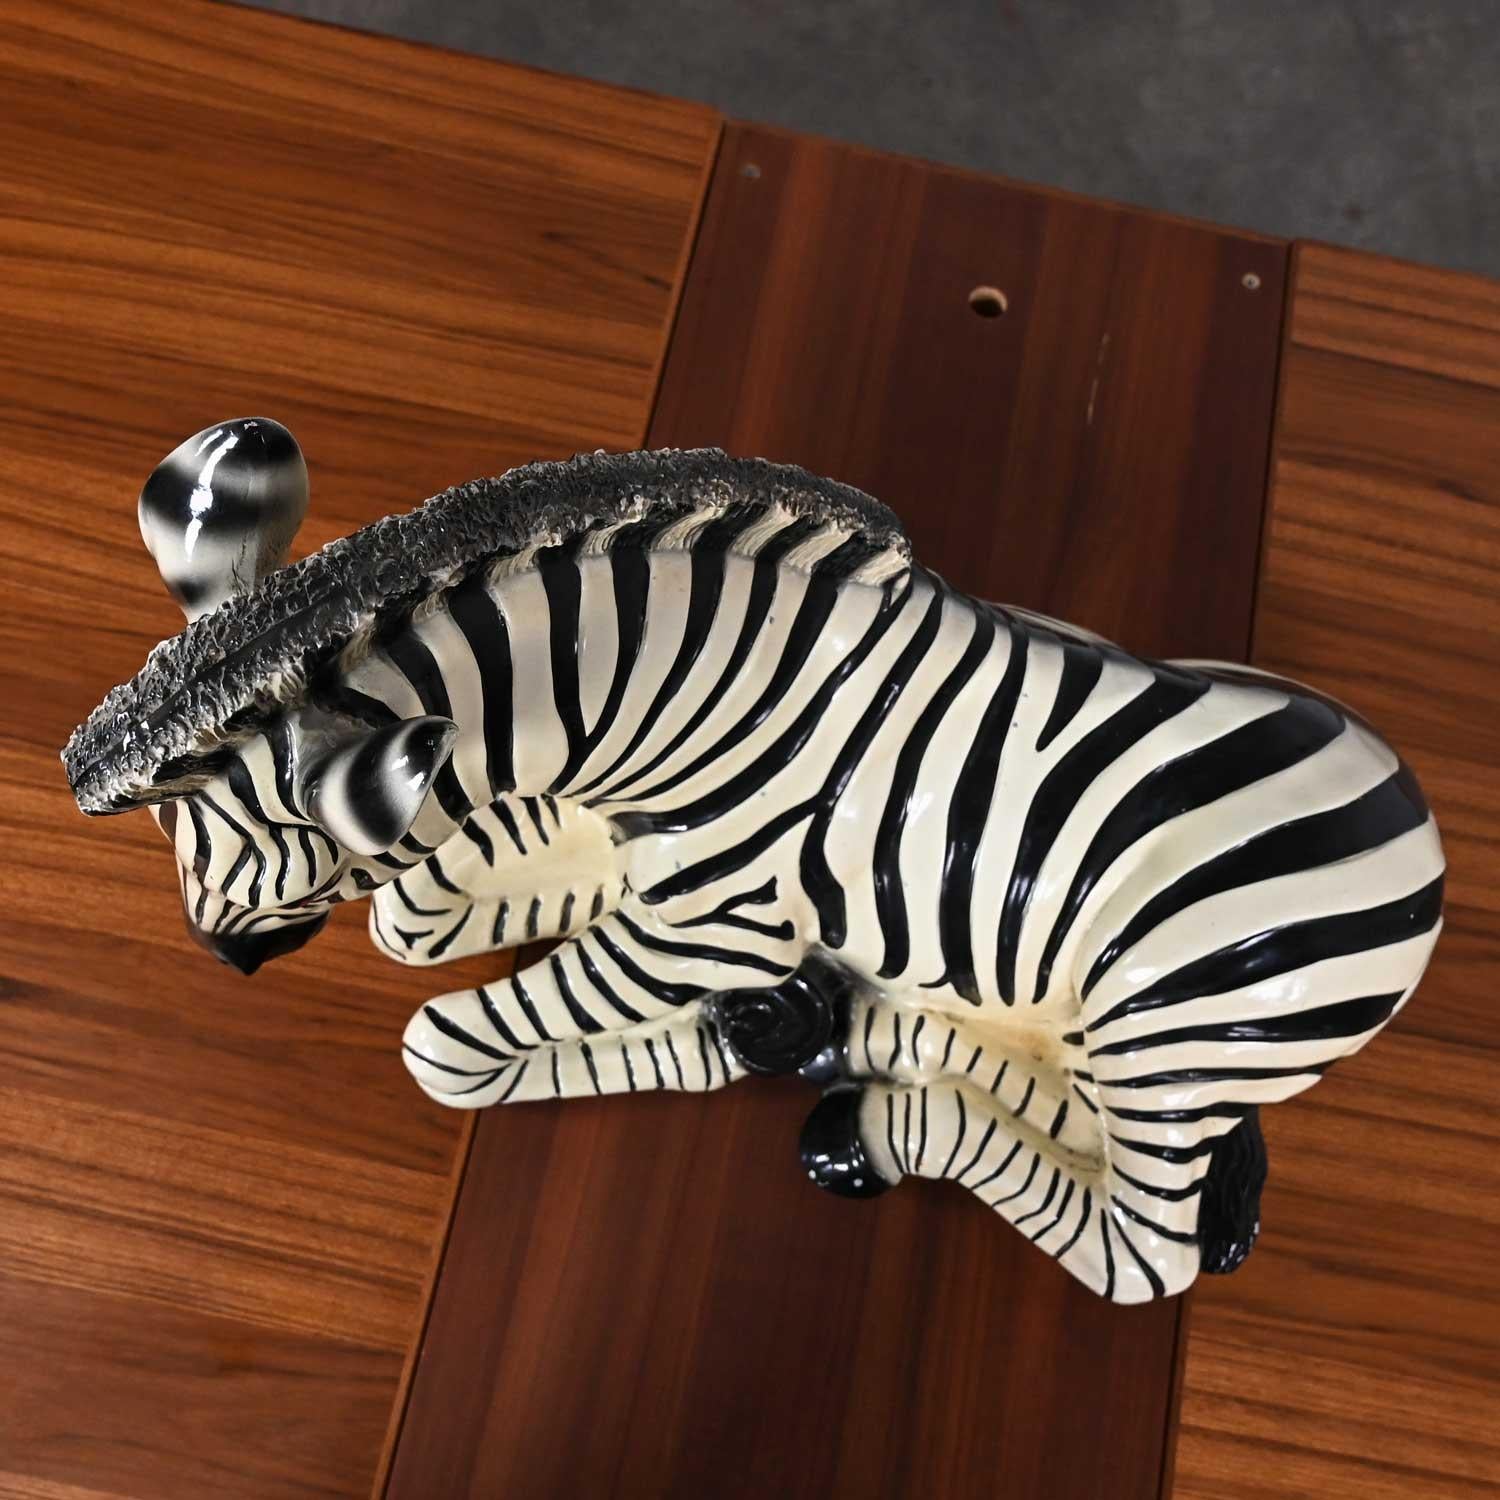 1970s Marwal Industries Large Scale Zebra Molded Resin Statue or Sculpture For Sale 3